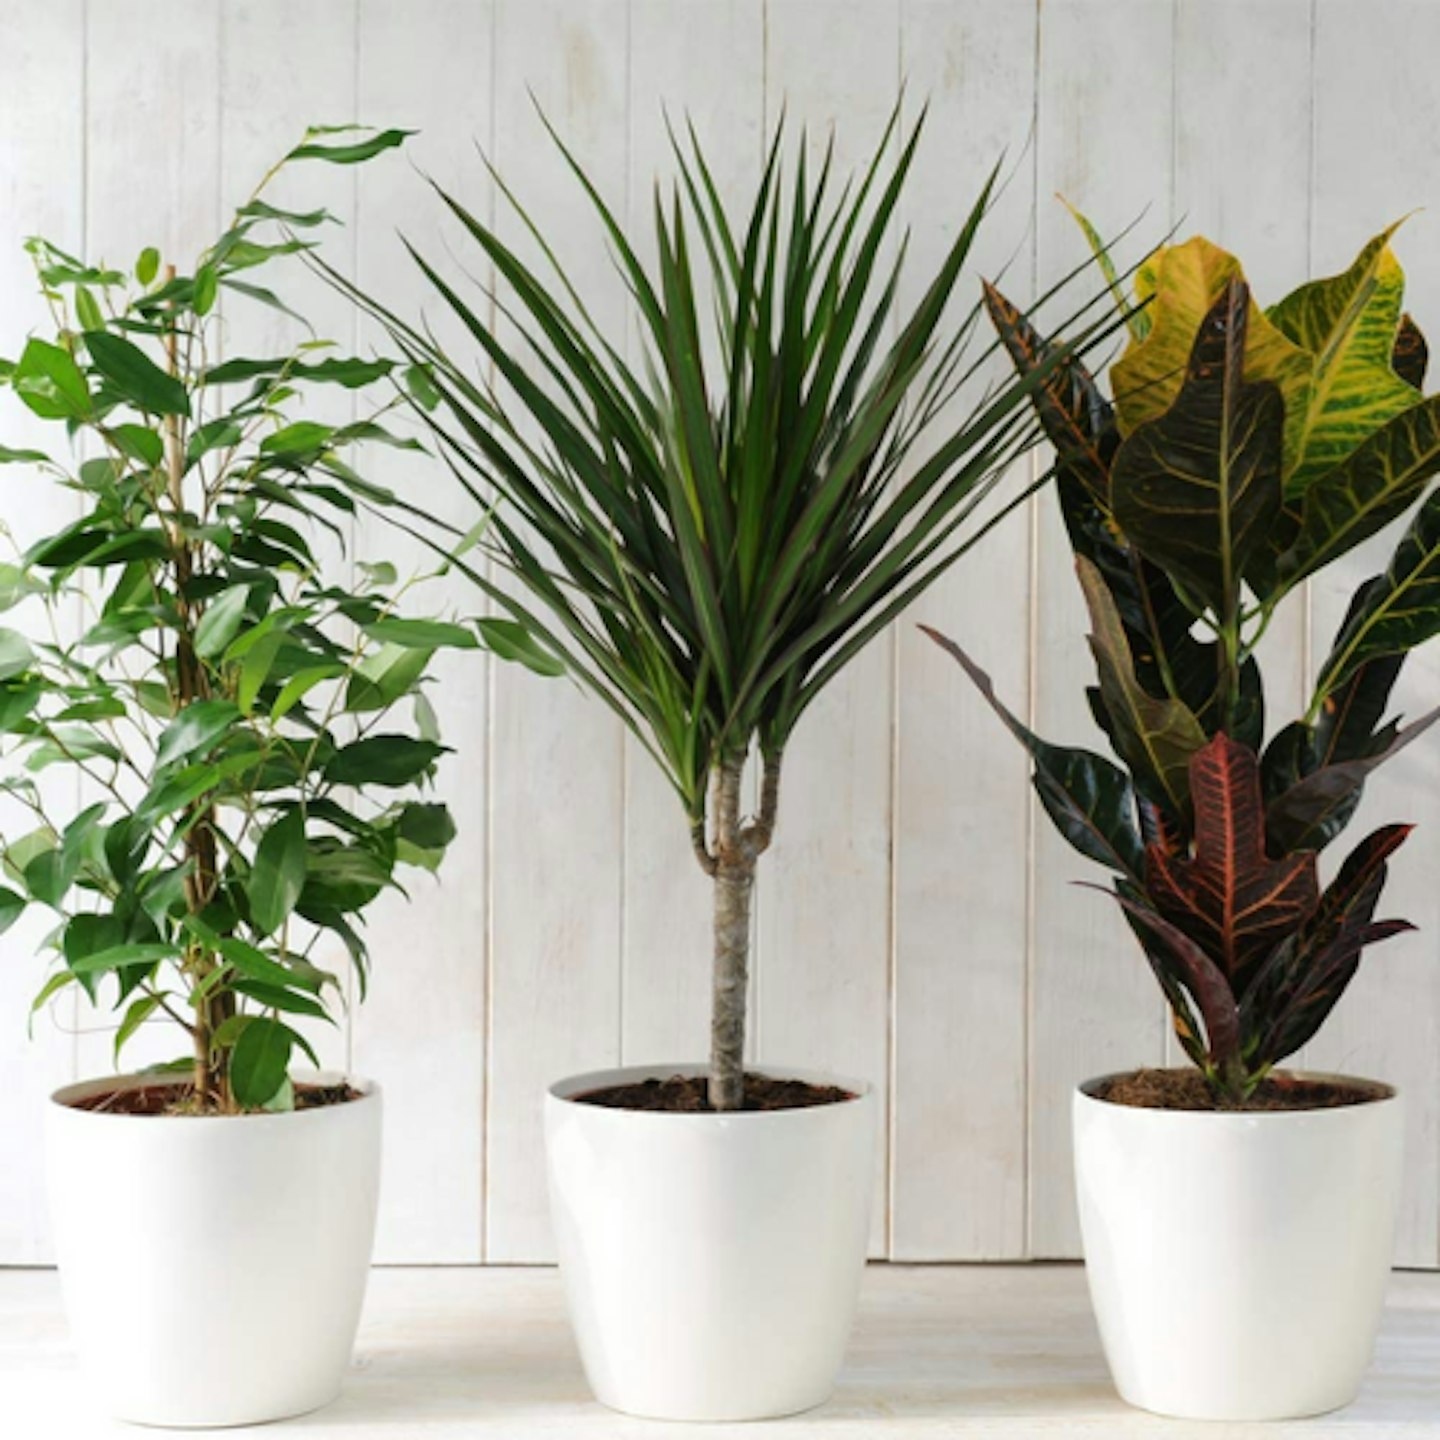 Evergreen Indoor House Plants Collection